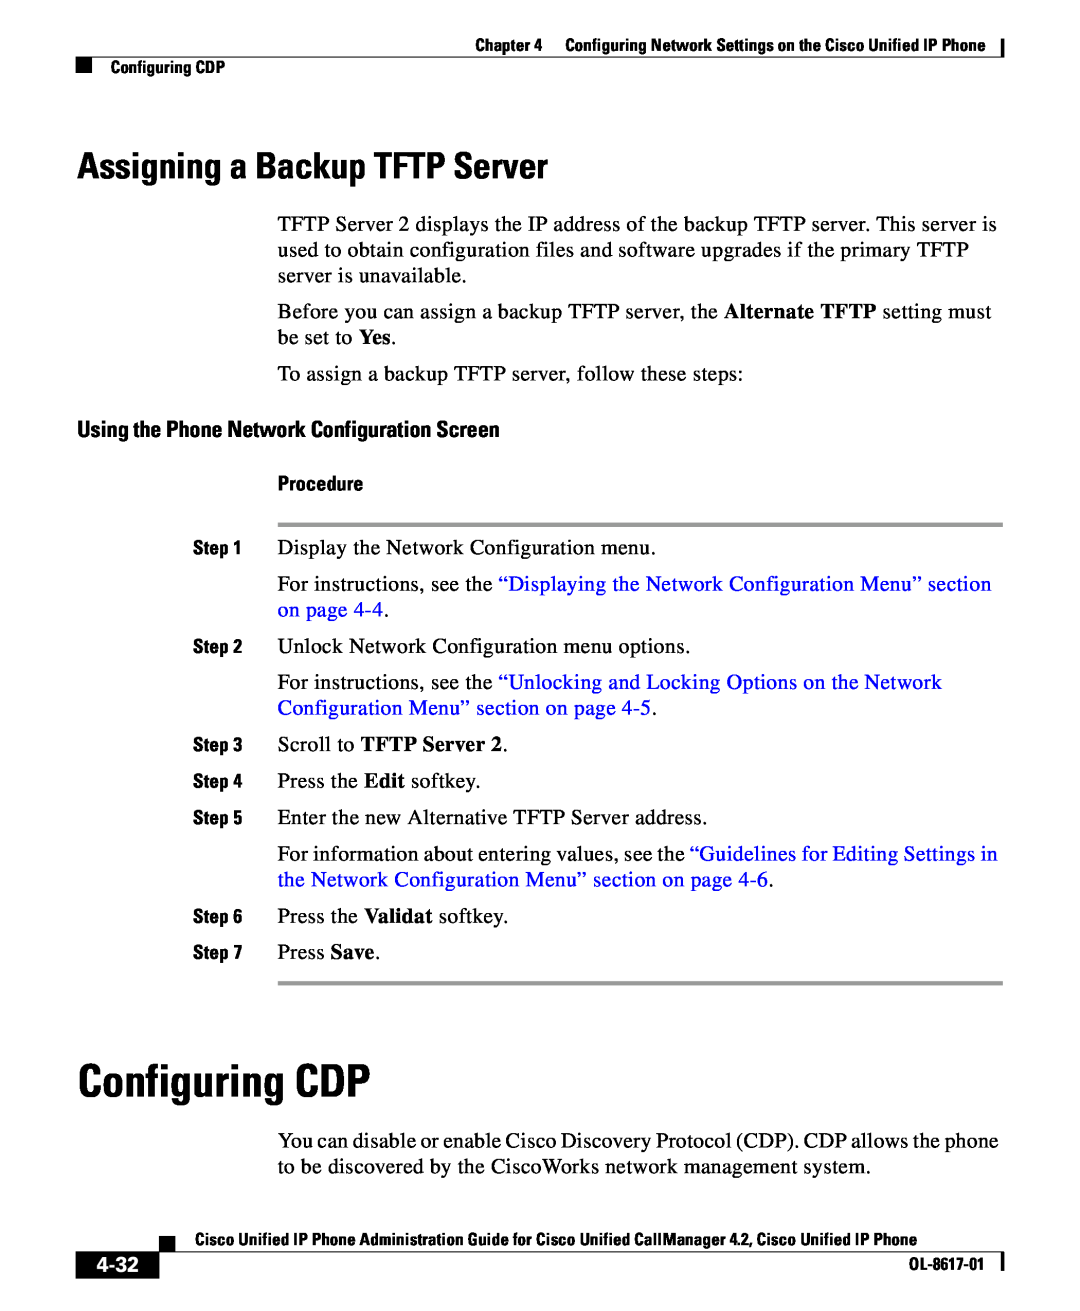 Cisco Systems 4.2 Configuring CDP, Assigning a Backup TFTP Server, 4-32, Using the Phone Network Configuration Screen 